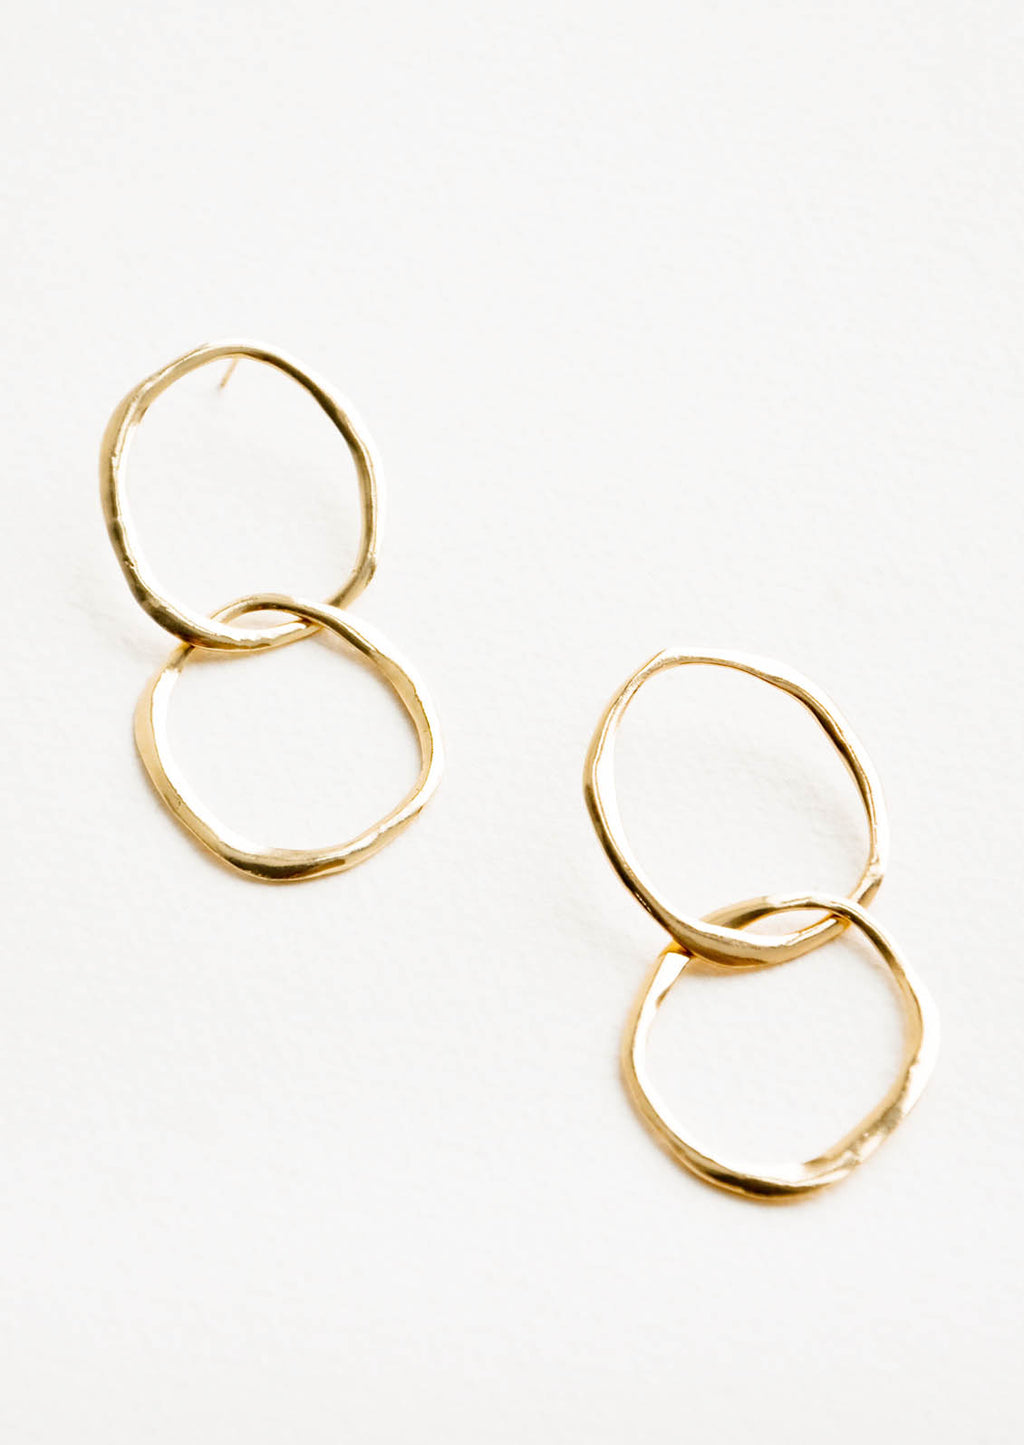 1: Gold drop earrings consisting of two interwoven hammered circles.